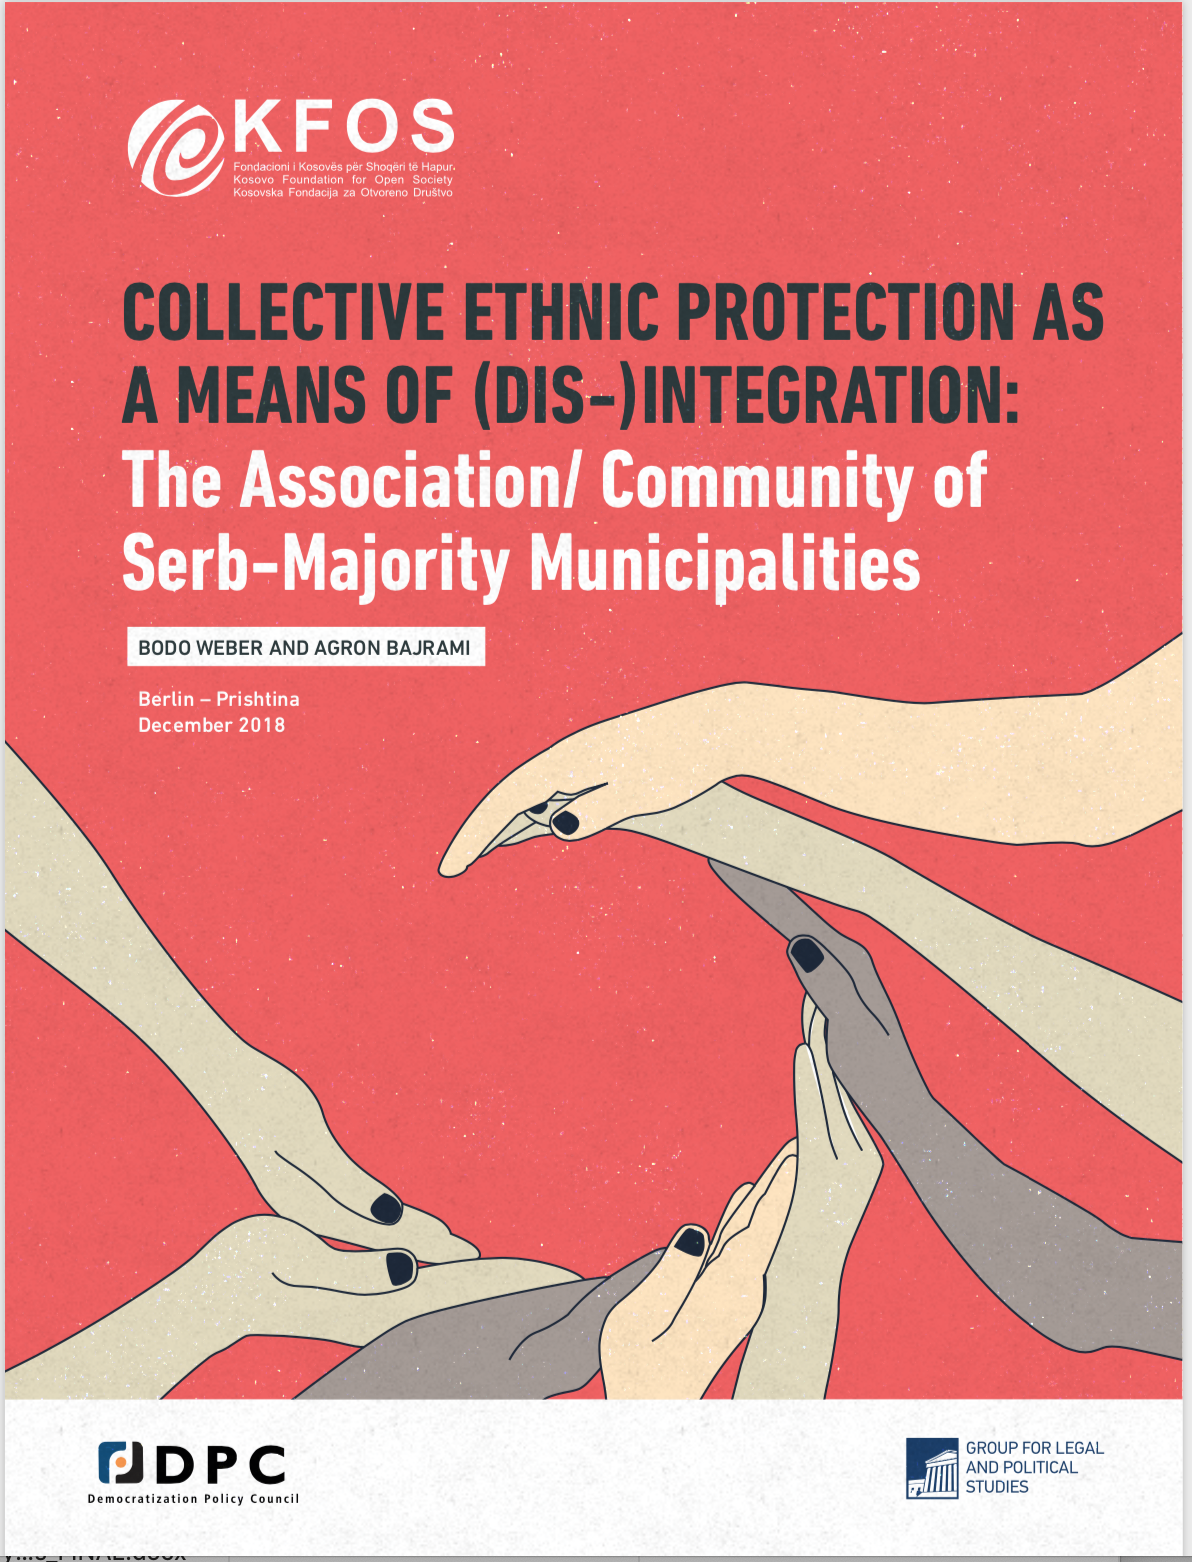 Collective ethnic protection as a means of (dis)integration: The Association/Community of Serb-majority muncipalities